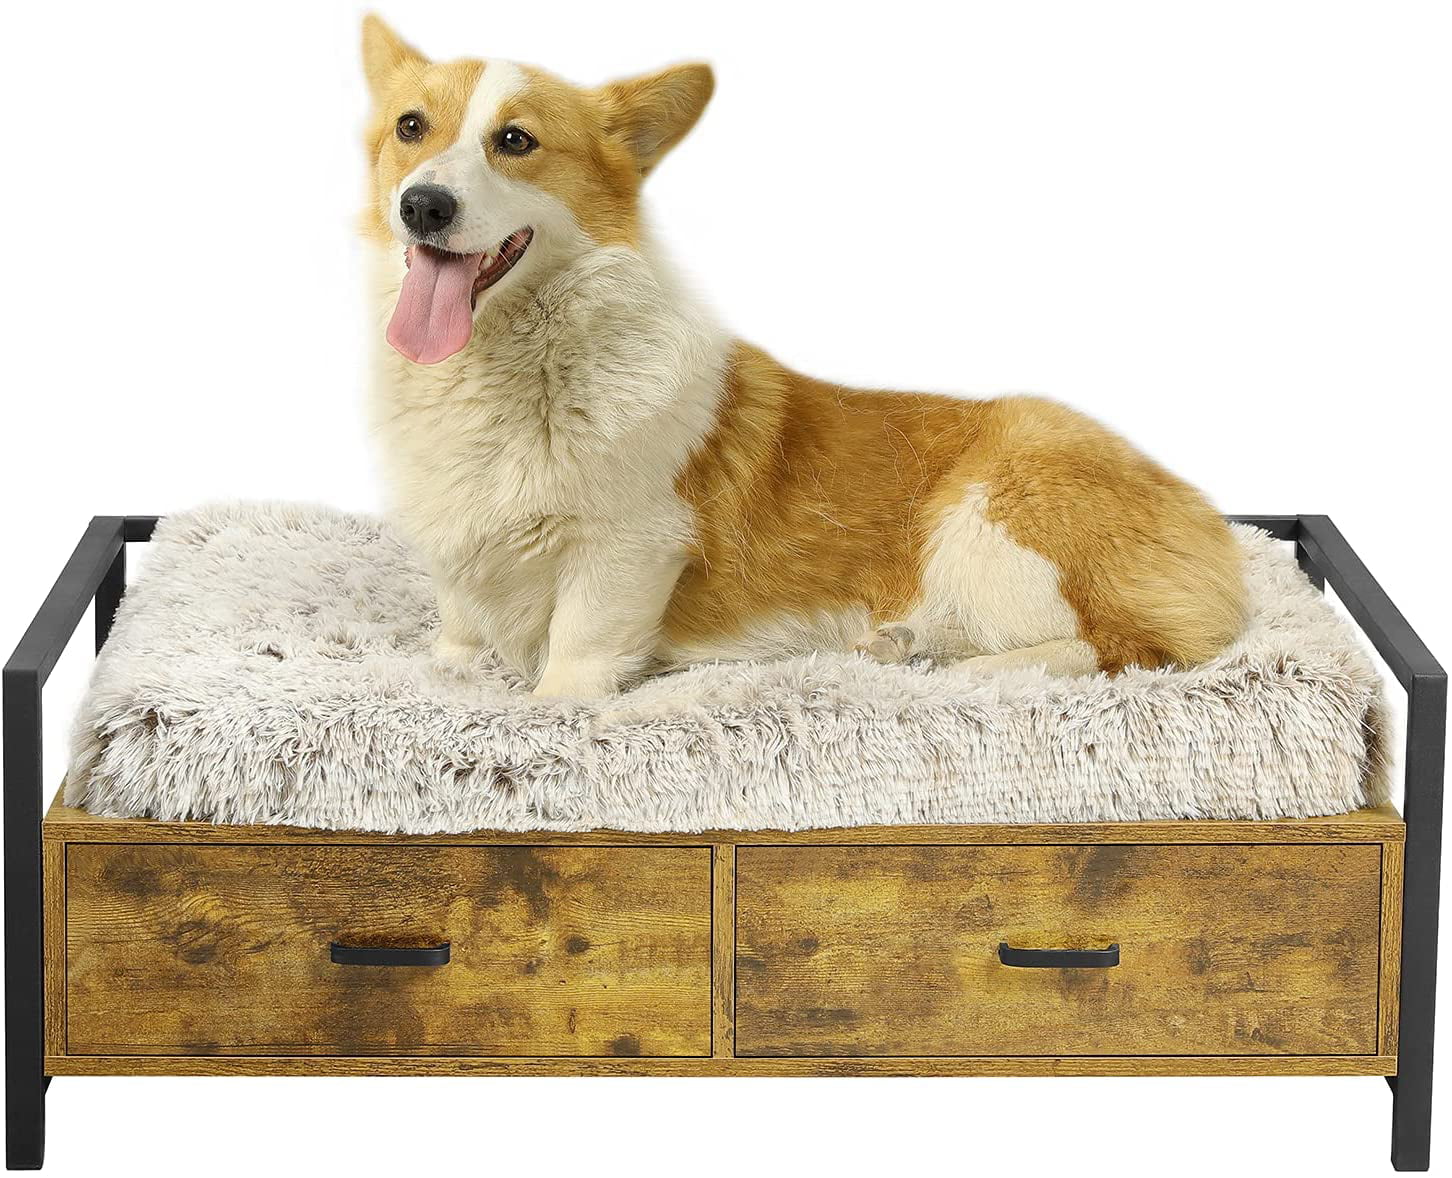 ZXXL Wooden Pet Bed for Indoors Small Medium Large Elevated Dog Bed Frame Sofa-Style Couch with Comfortable Mattress Color : Style3, Size : M-74×49×36cm 